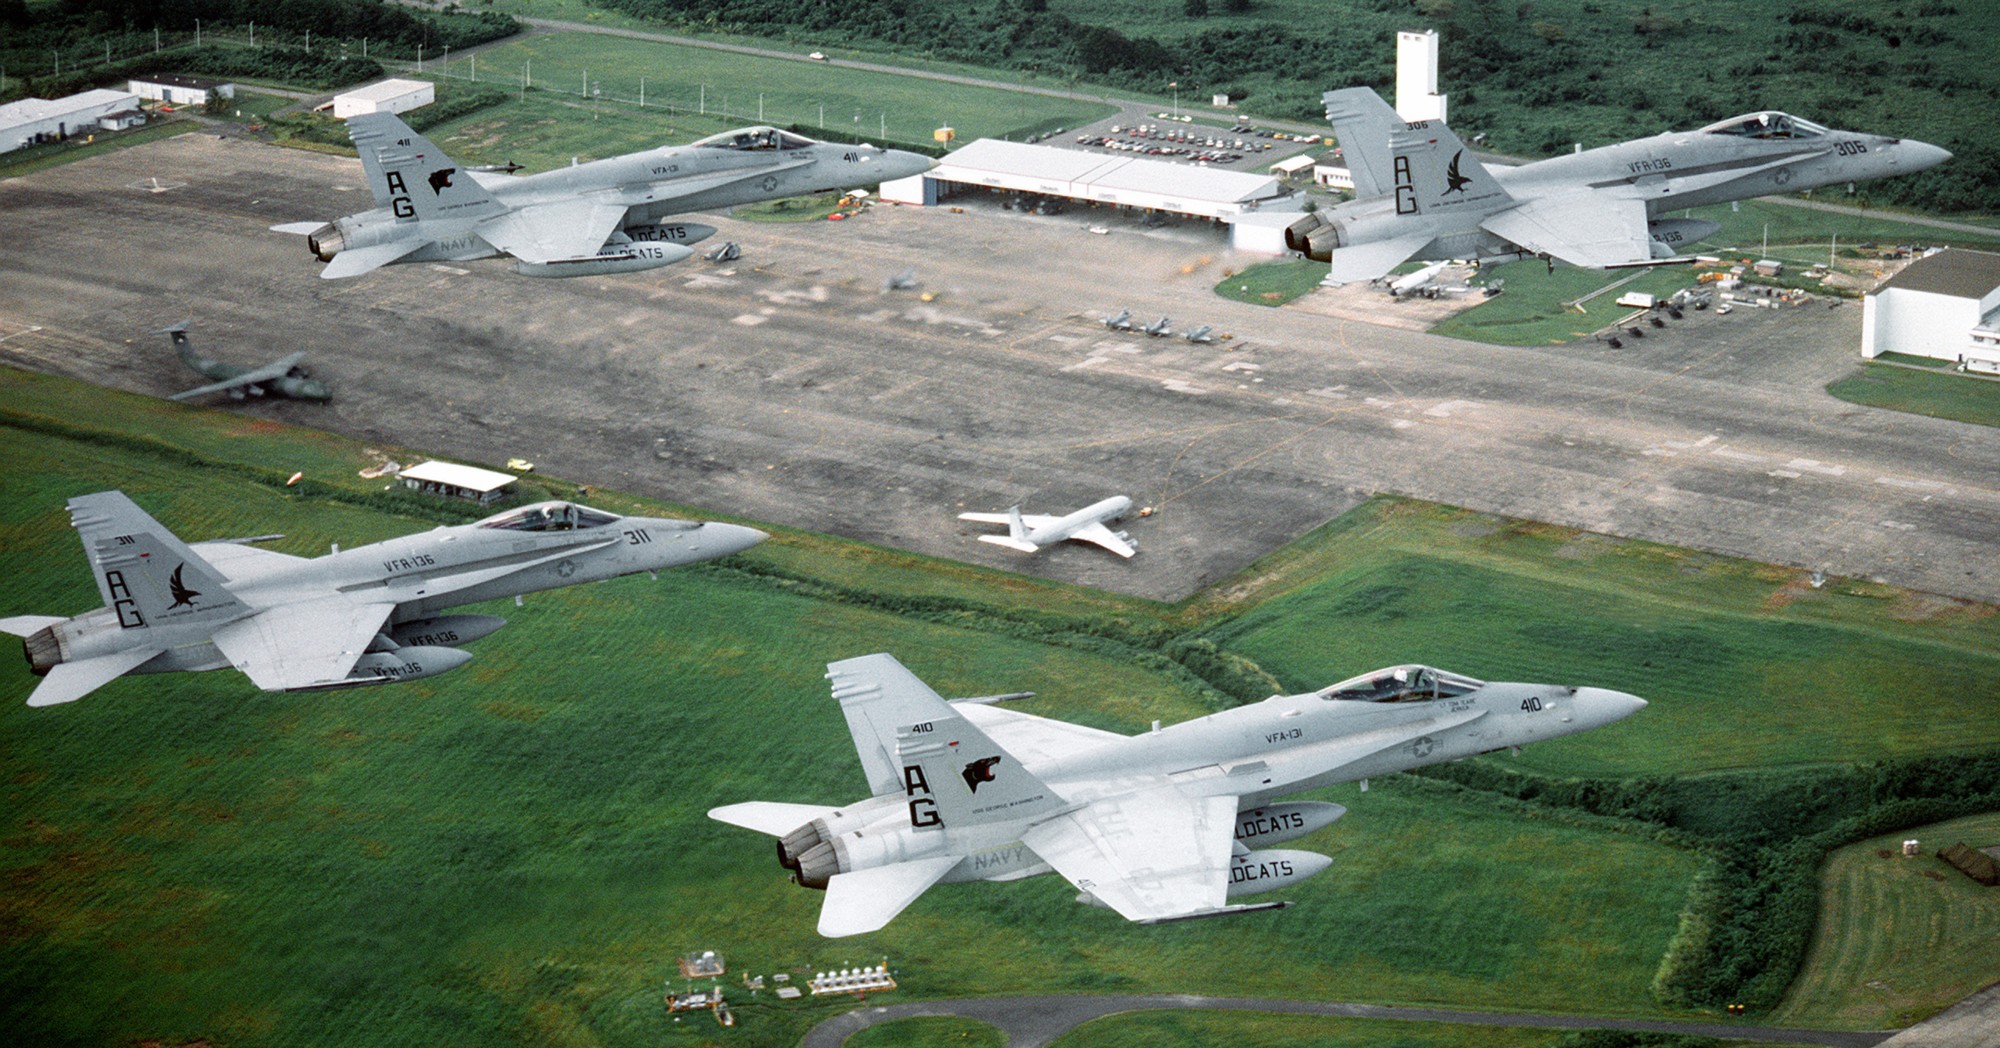 vfa-136 knighthawks strike fighter squadron f/a-18c hornet 1992 123 cvw-7 naval station roosevelt roads puerto rico